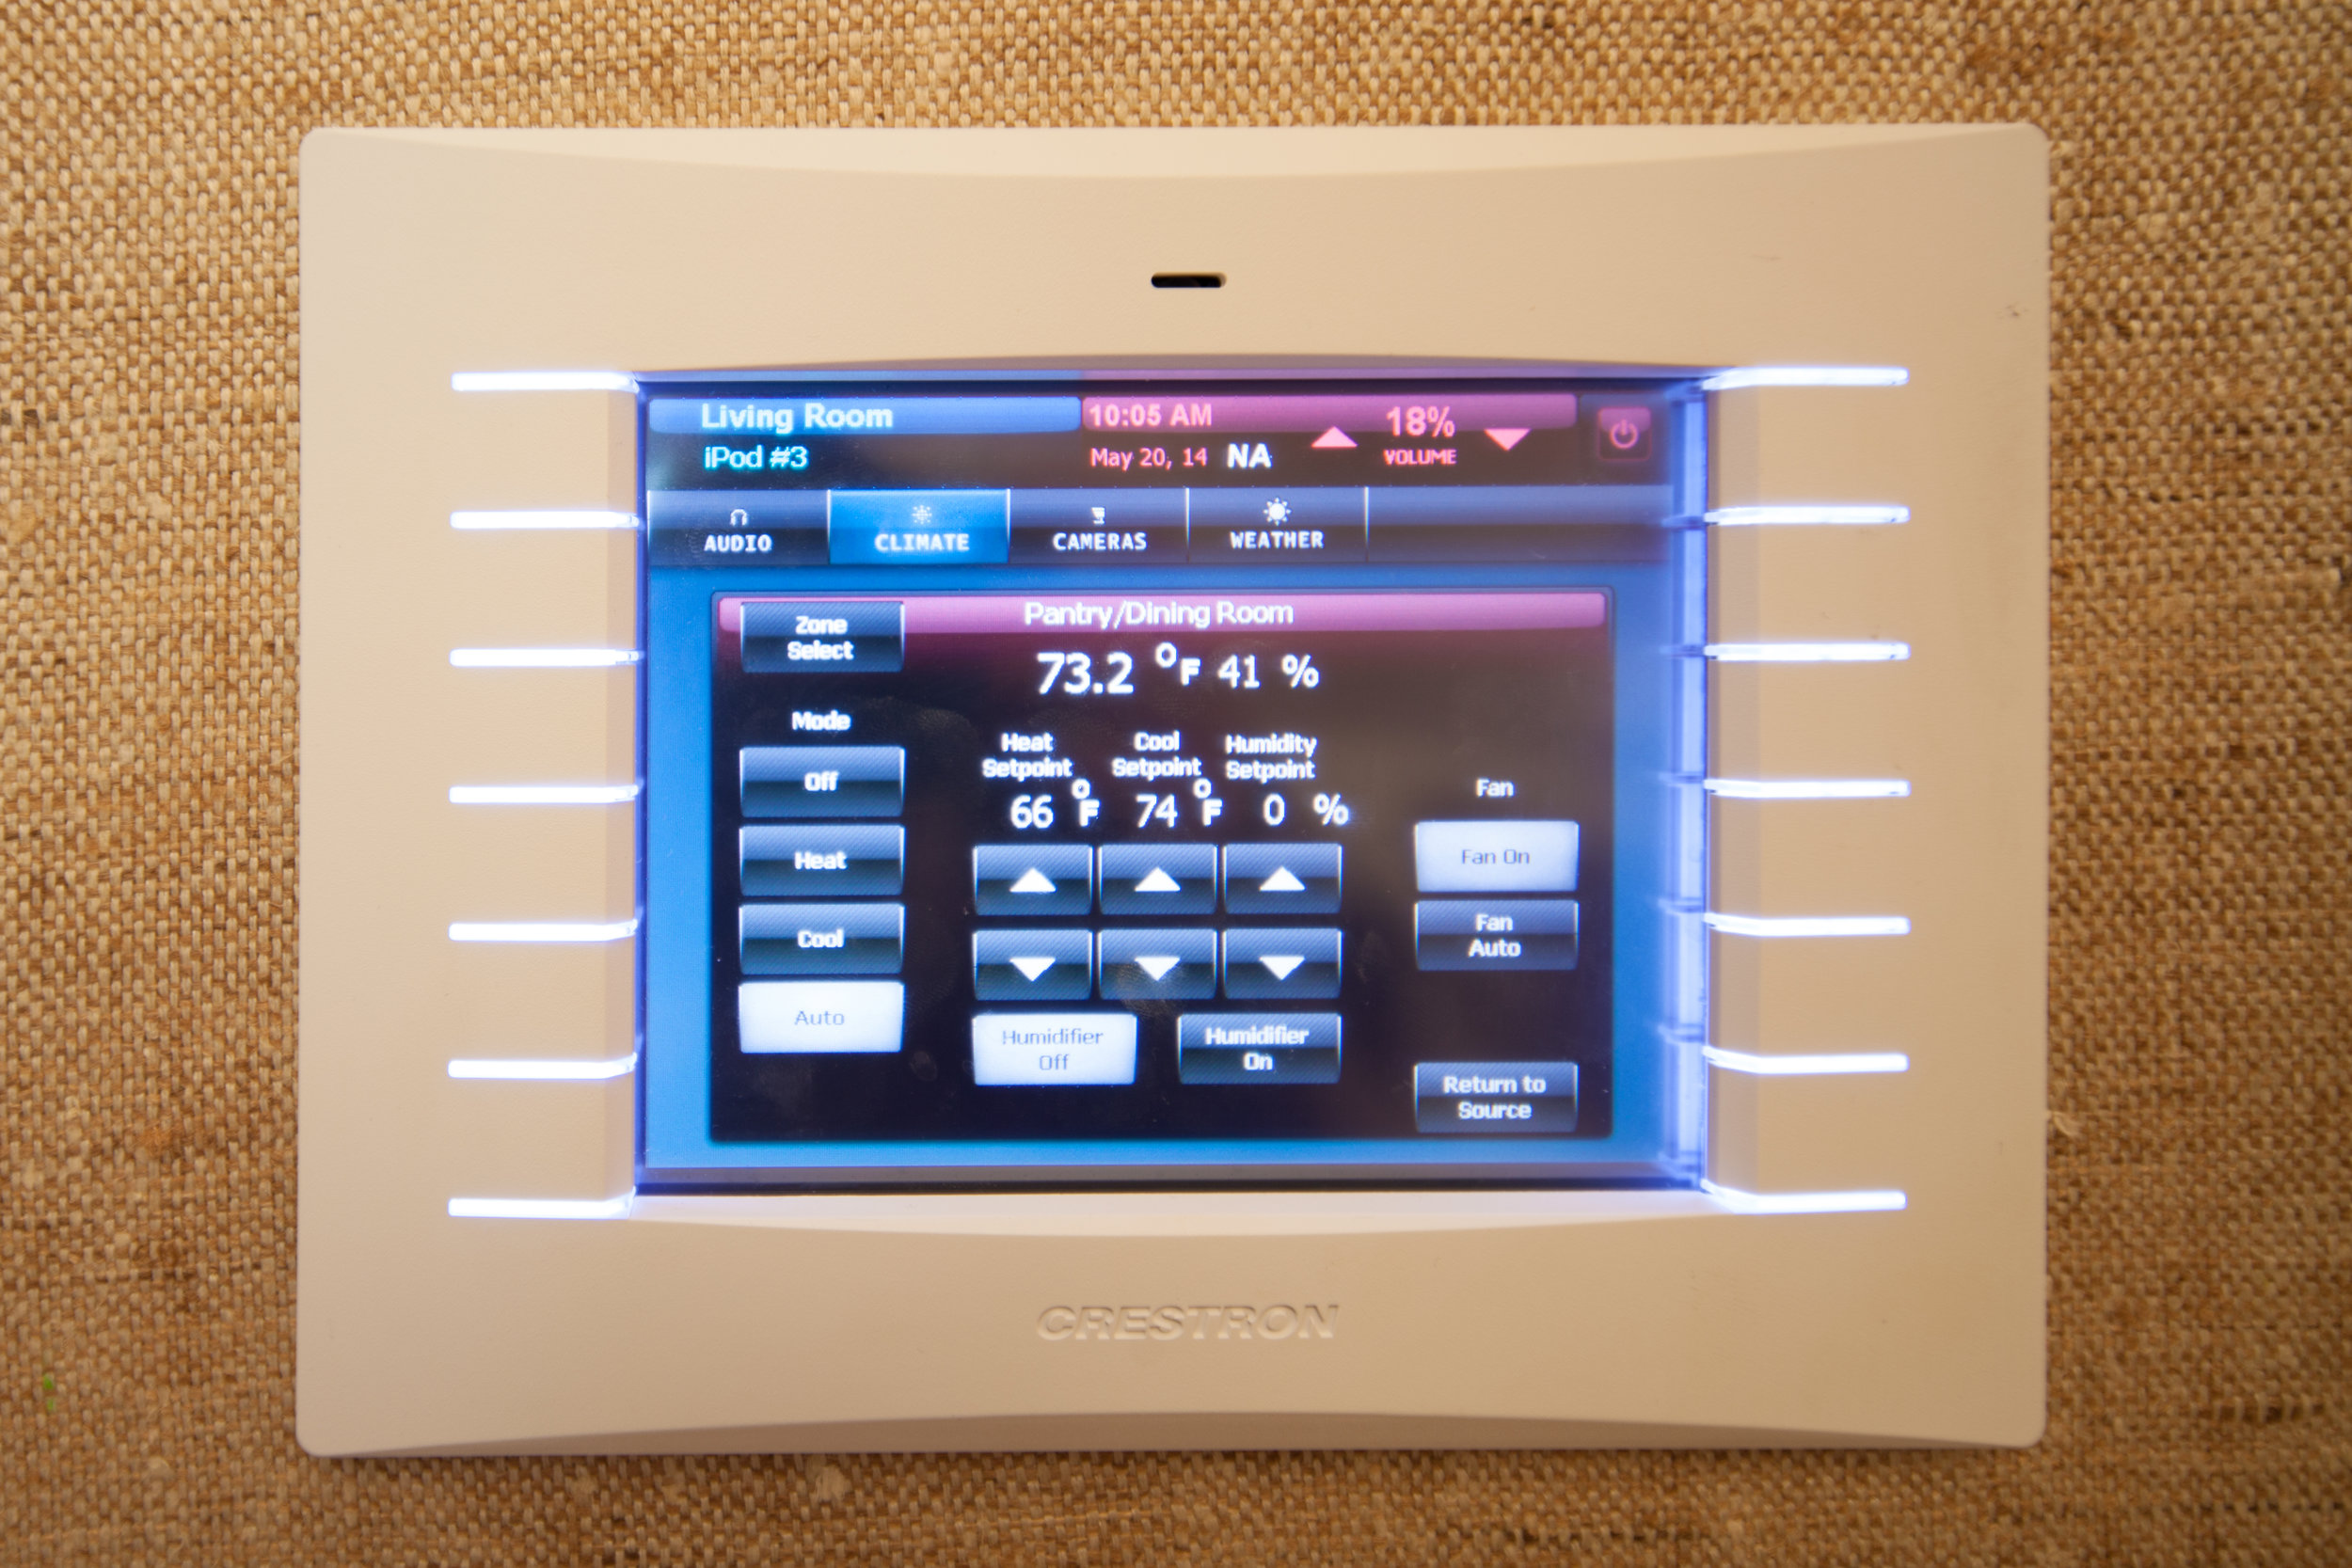  Customized control for accurate and tailored temperature and humidity levels for each resident's comfort. 